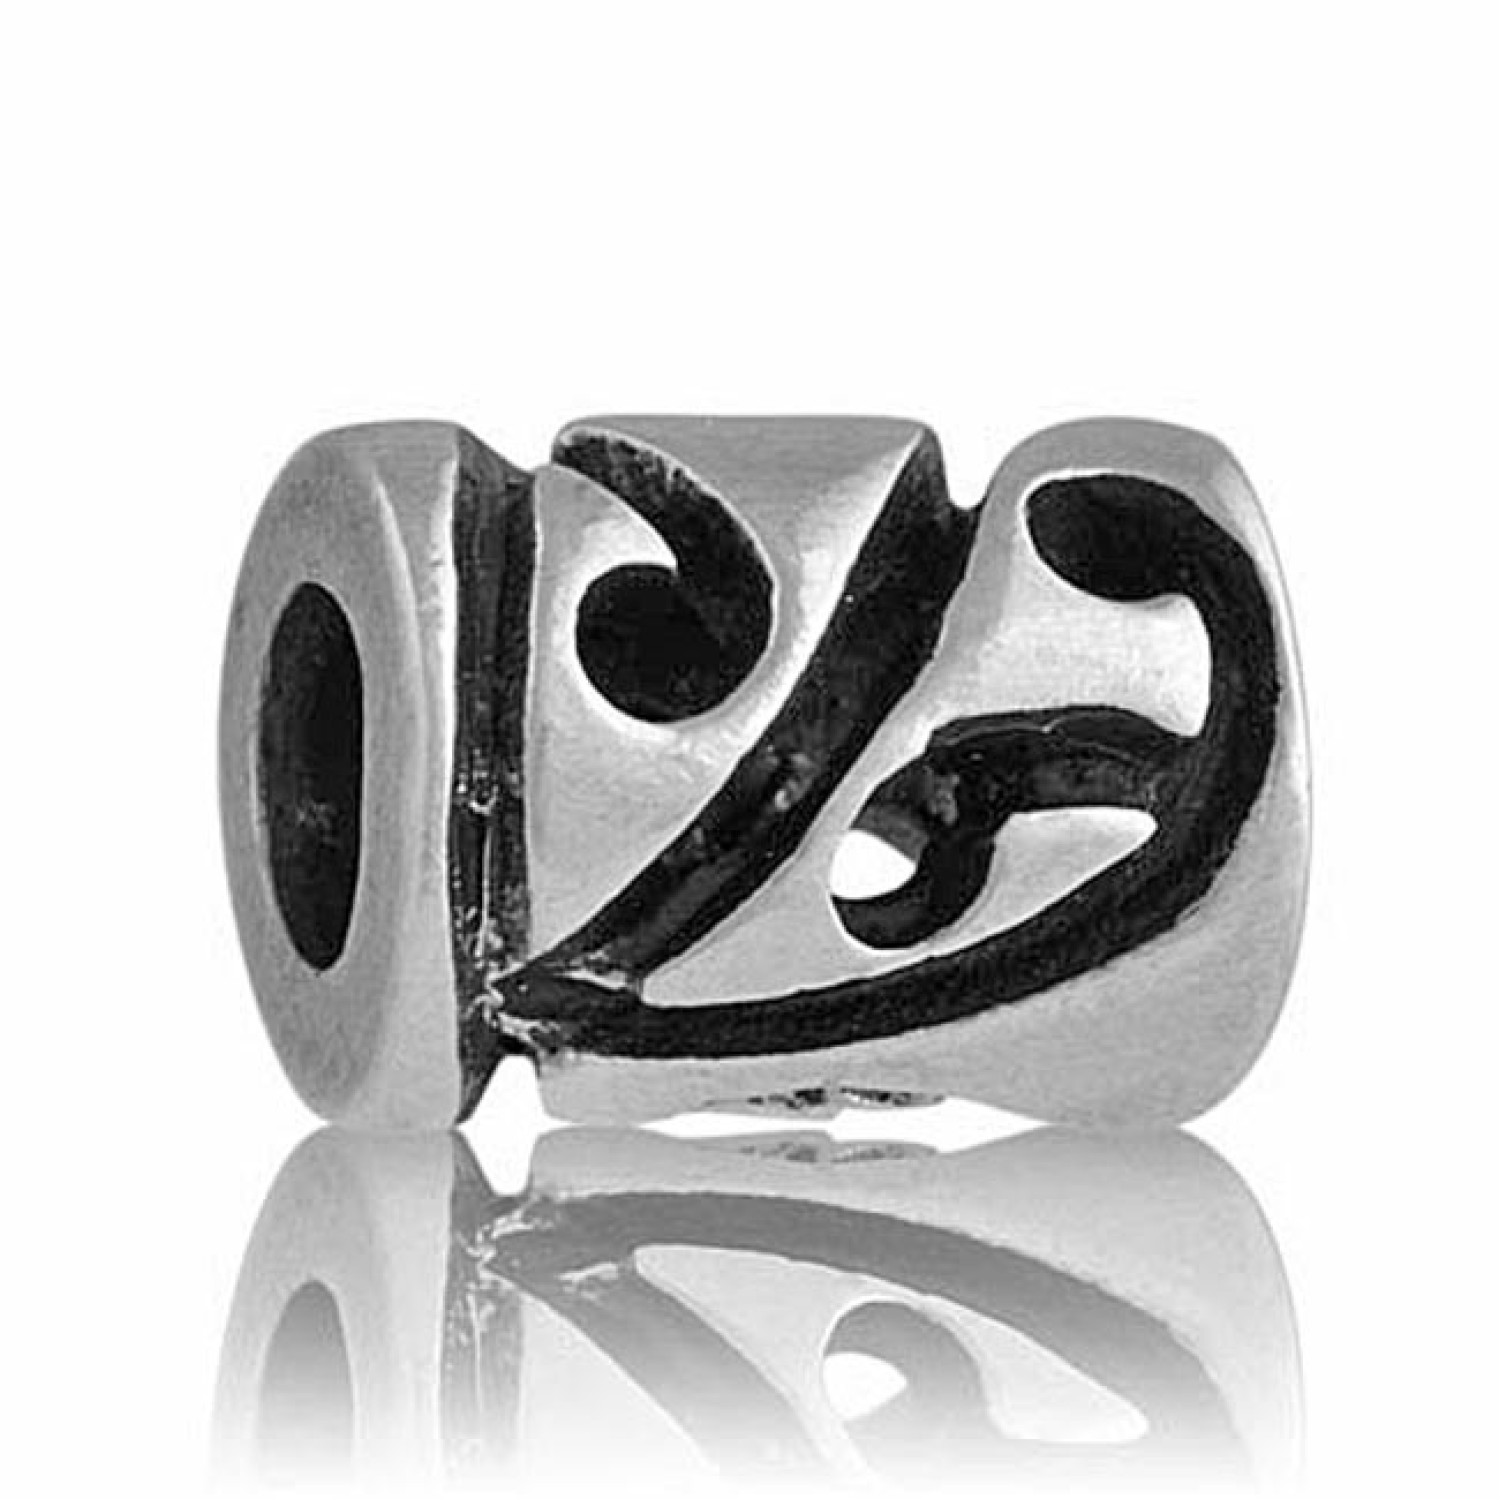 LKF002 Evolve Charm Kia Kaha Canterbury - Be Strong. Evolve Charm Kia Kaha Canterbury - Be Strong Kia Kaha is a Maori phrase that translates to stand strong.  3 Months No Payments and Interest for Q Card holders 925 Sterling Silver Christies exclusive 5 @